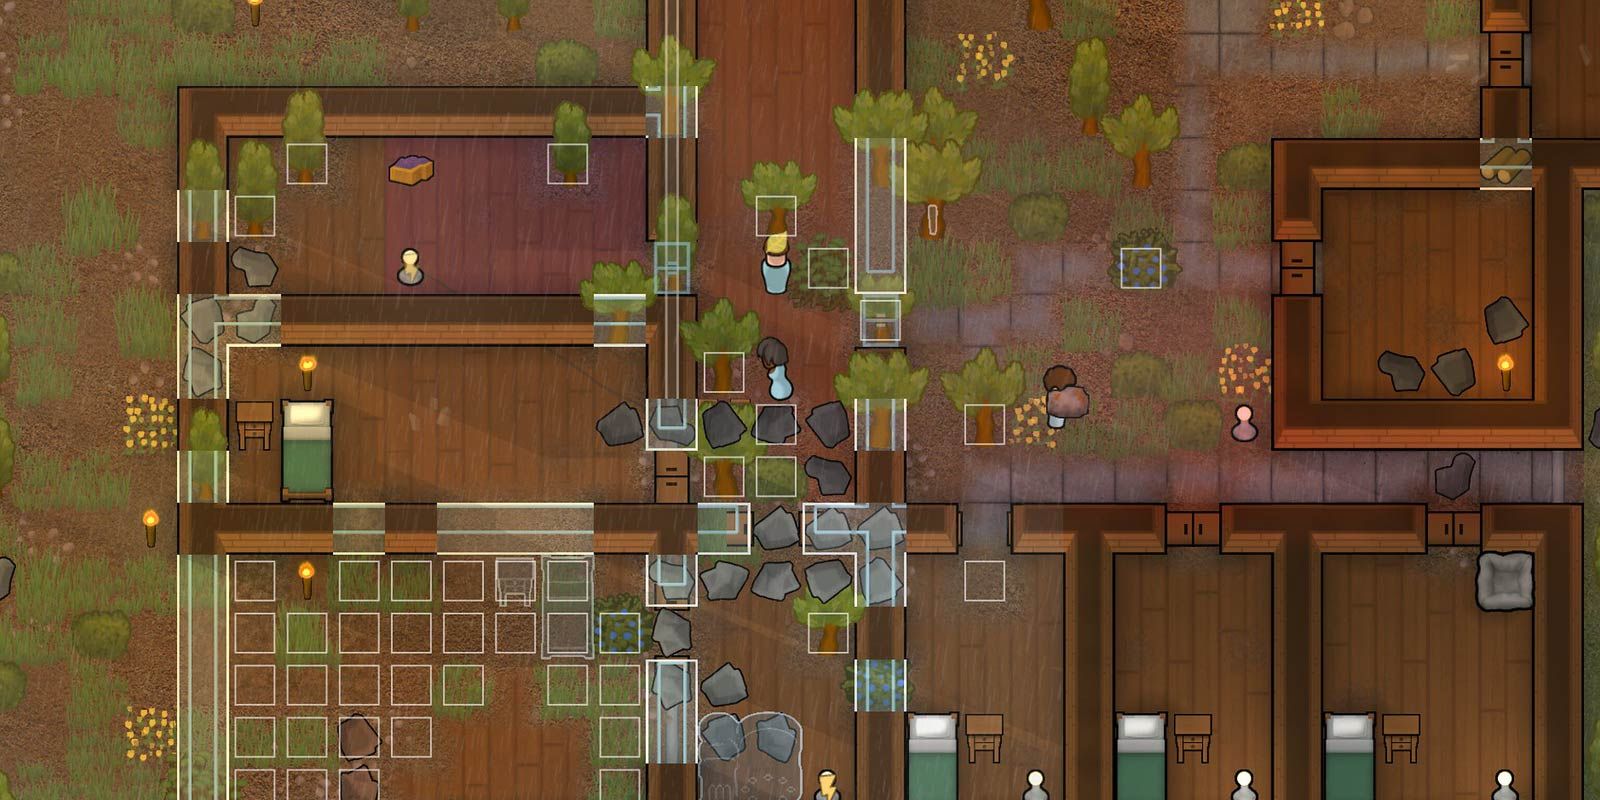 Colonists working on a large wooden building in Rimworld.